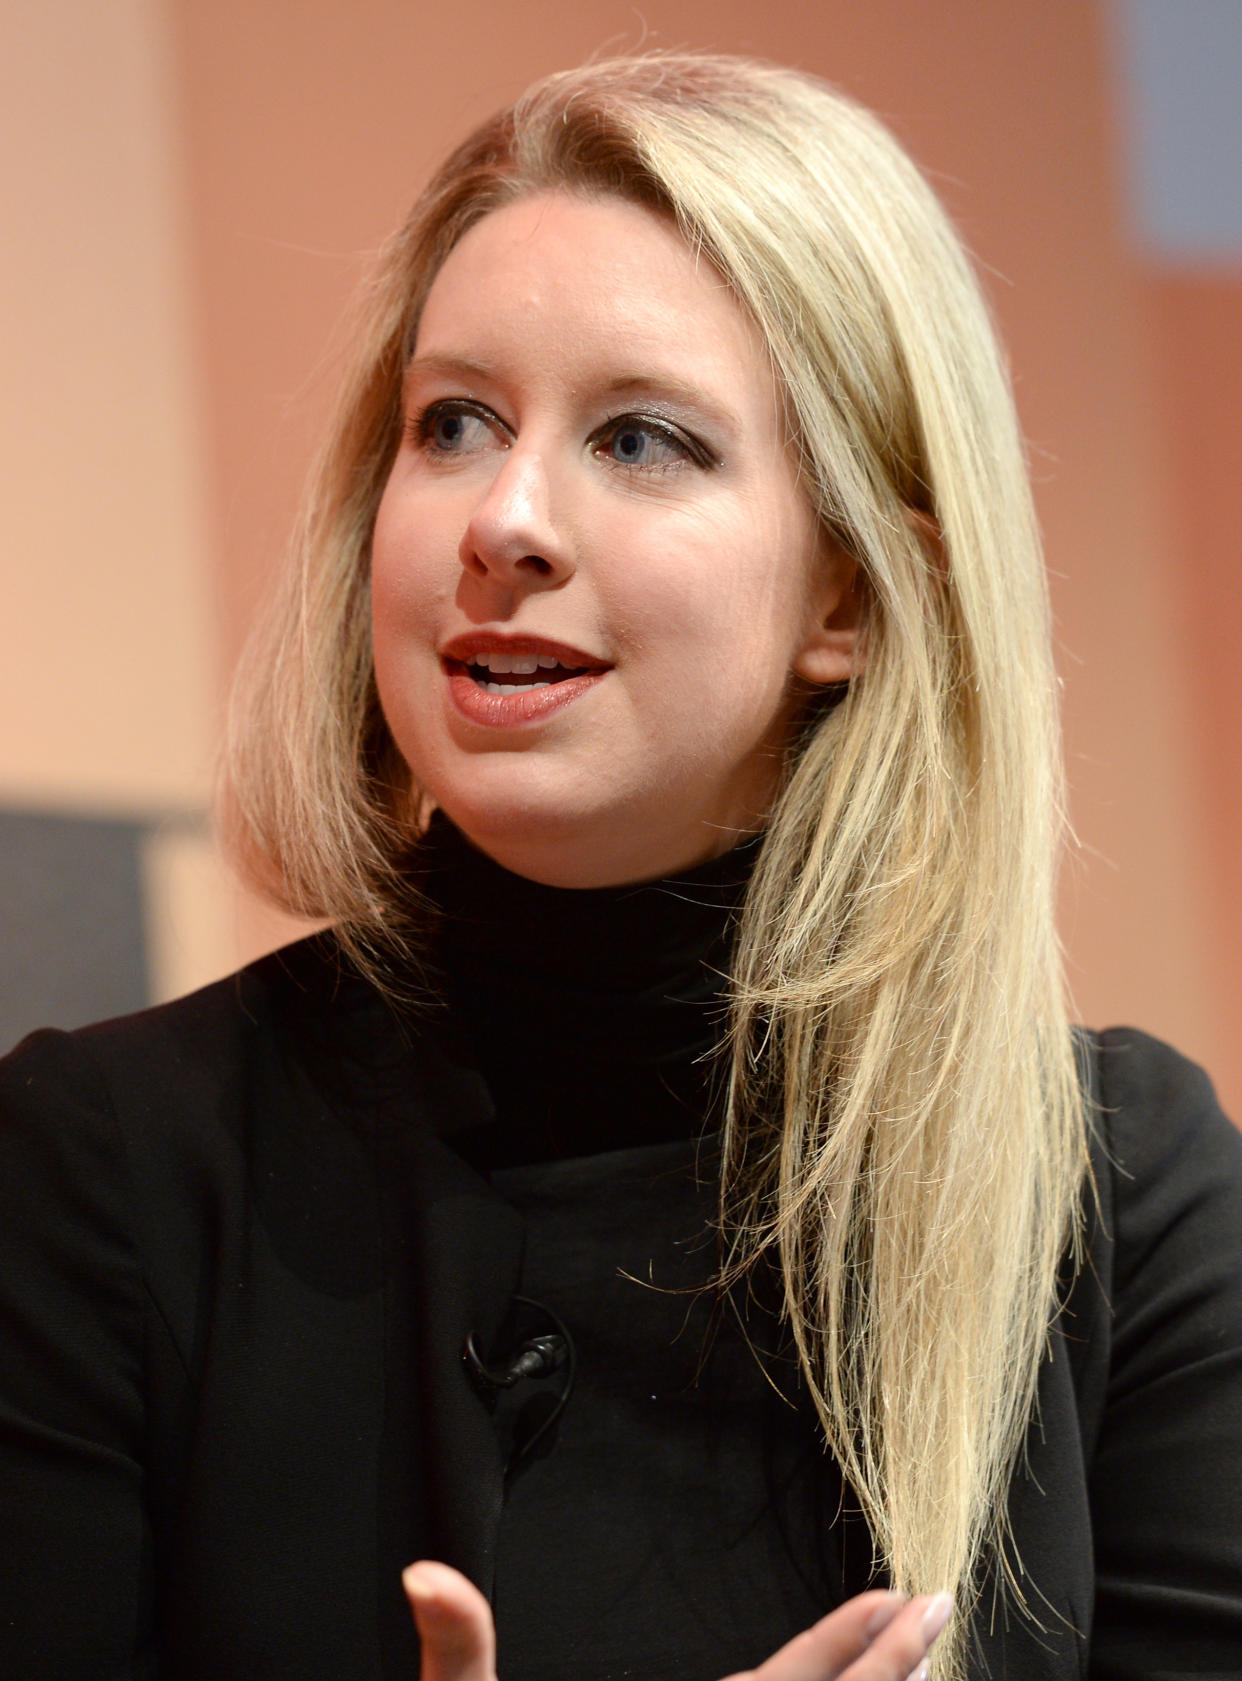 Elizabeth Holmes, the former CEO of Theranos, is charged with “massive fraud.” (Photo: Getty Images)